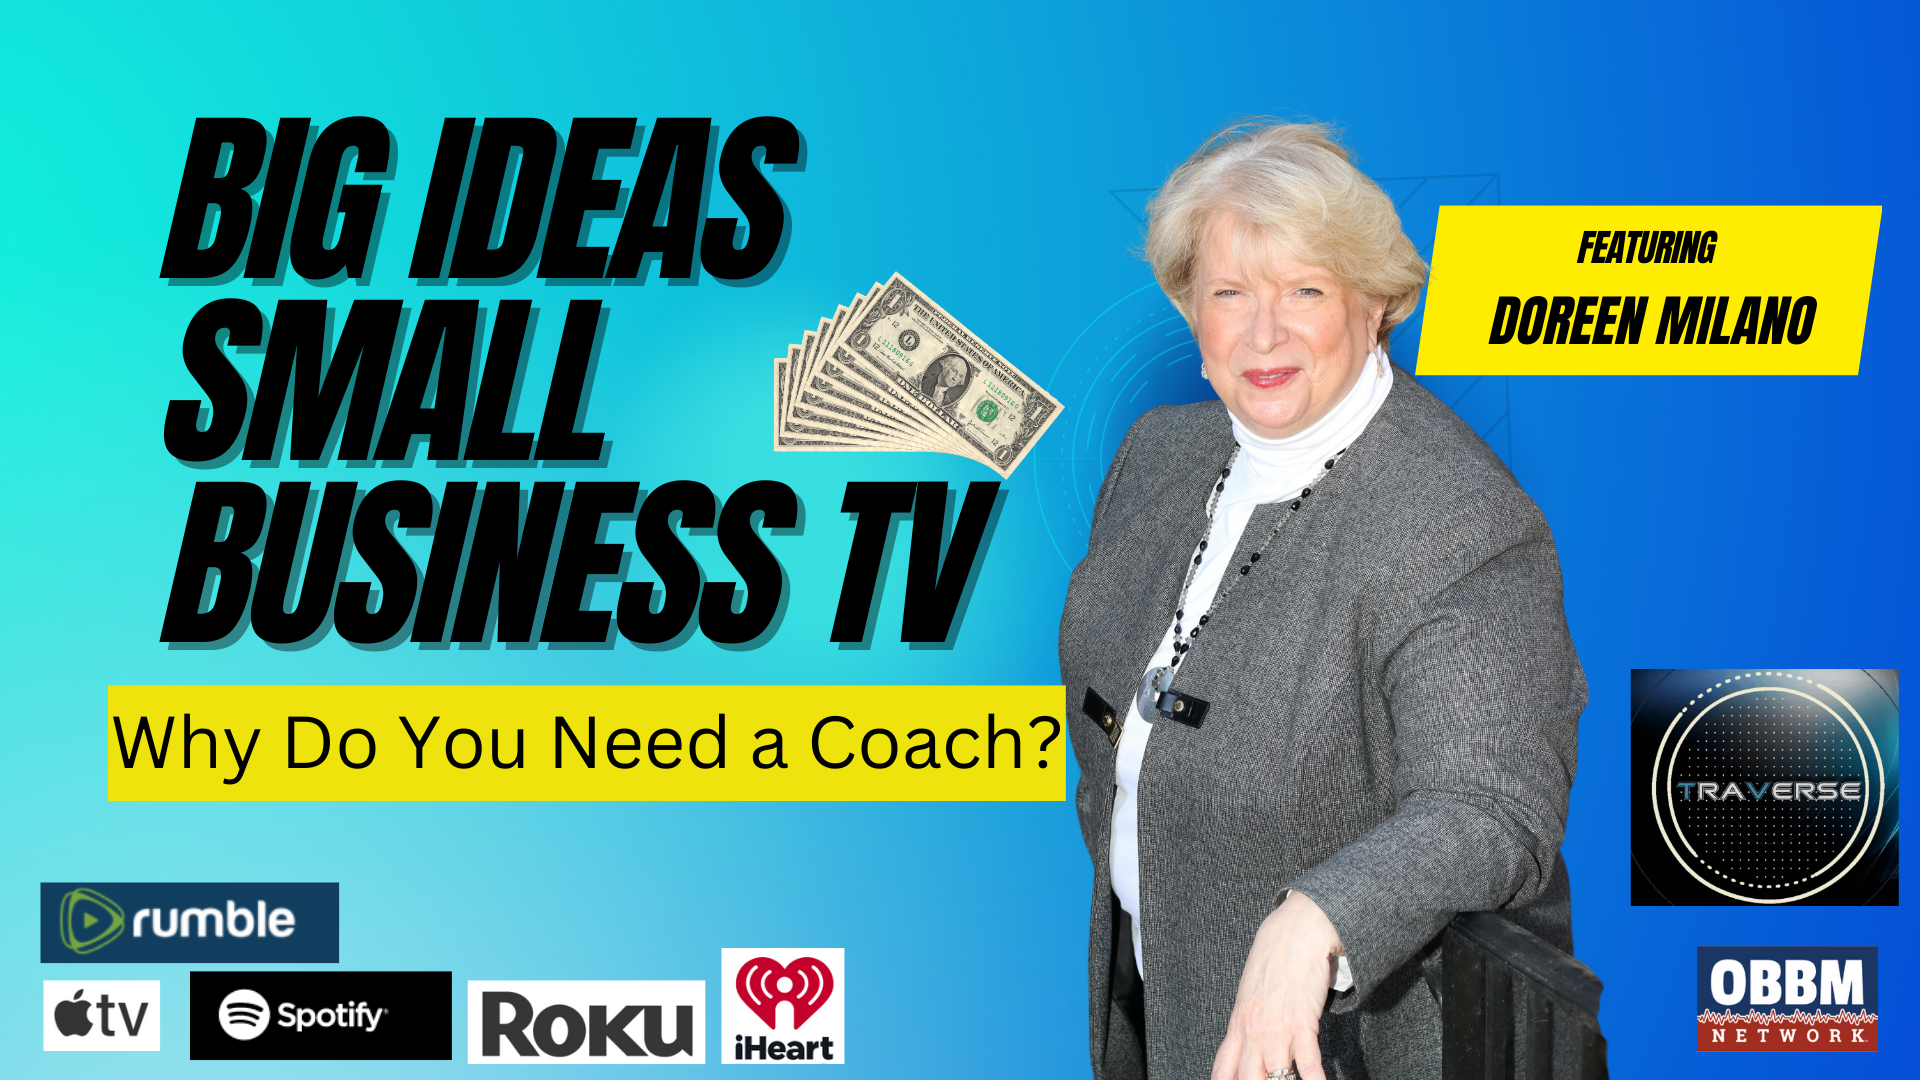 BISB06-Why You Need a Coach - Big Ideas, Small Business TV